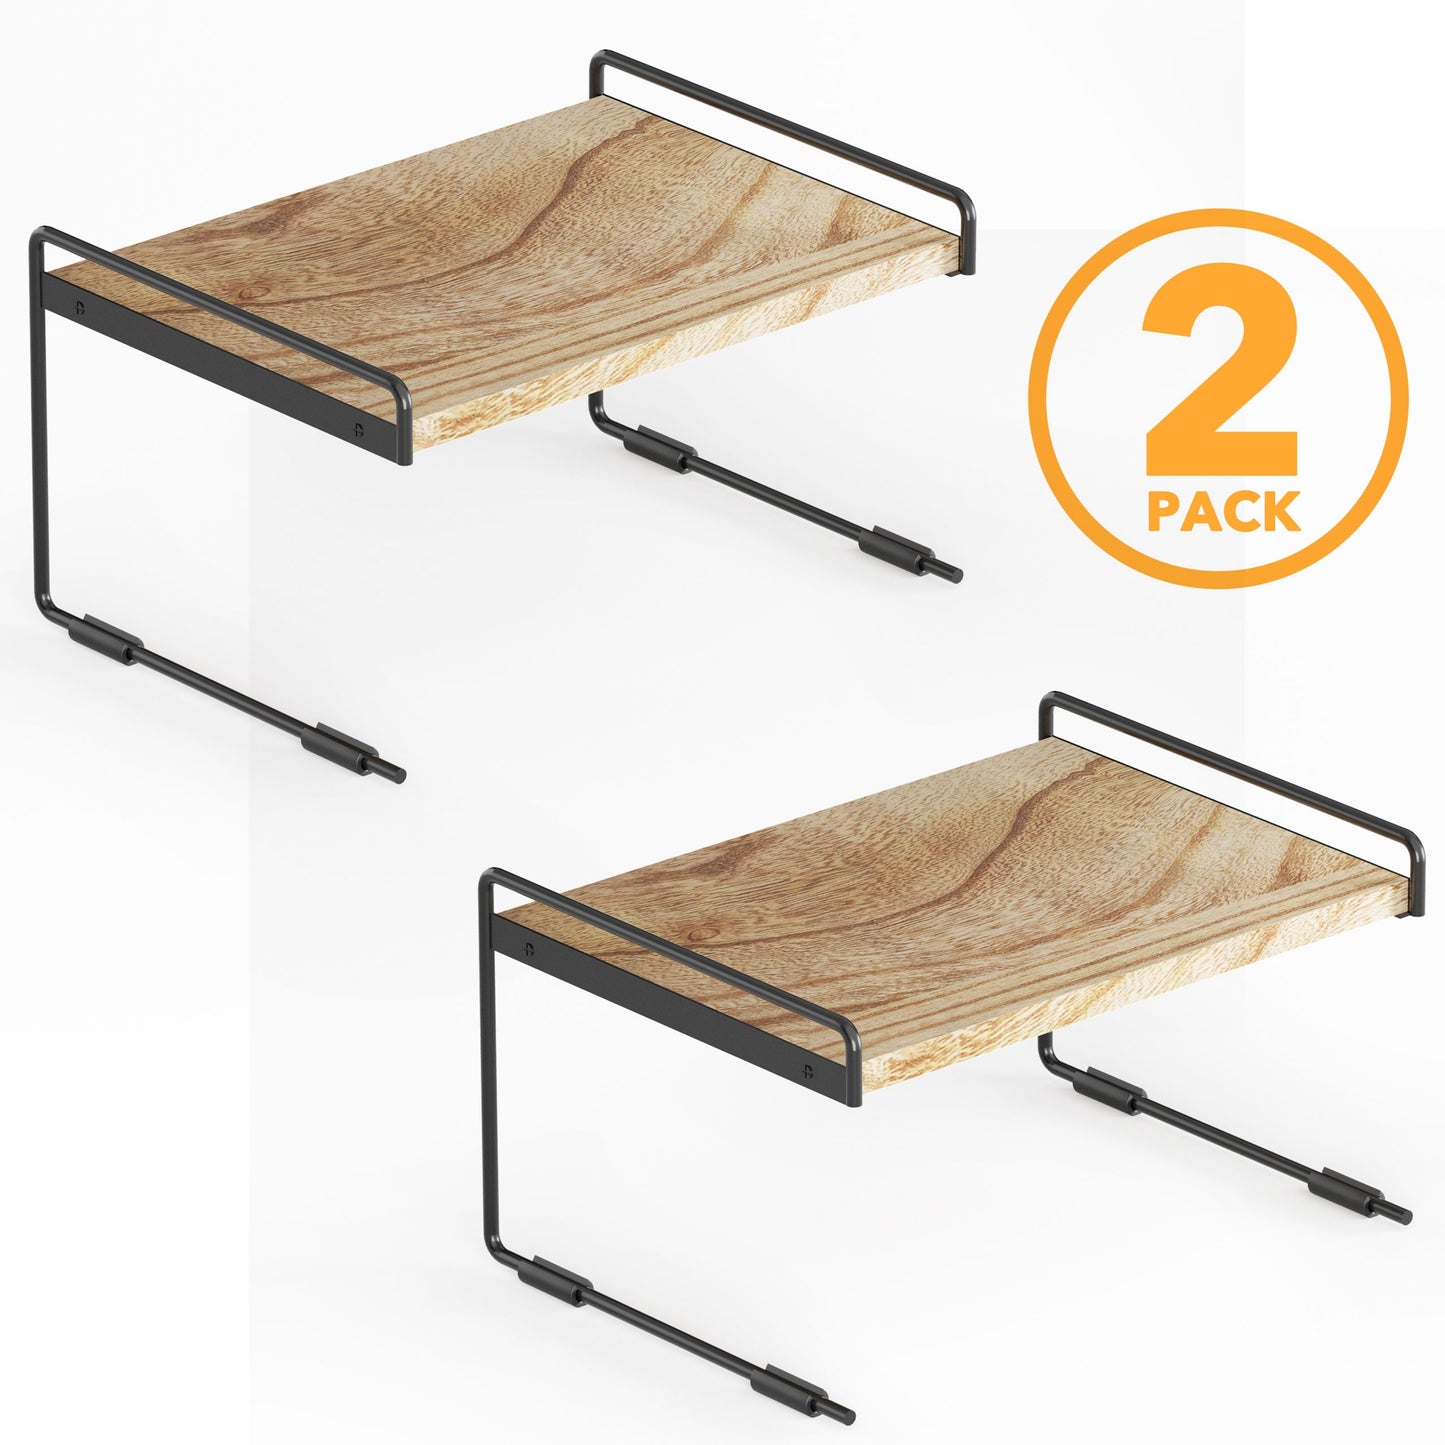 SpaceAid Cabinet Shelf Organizers 2 Pack, Kitchen Counter Organizer Rack, Metal and Wood, 13" Wide